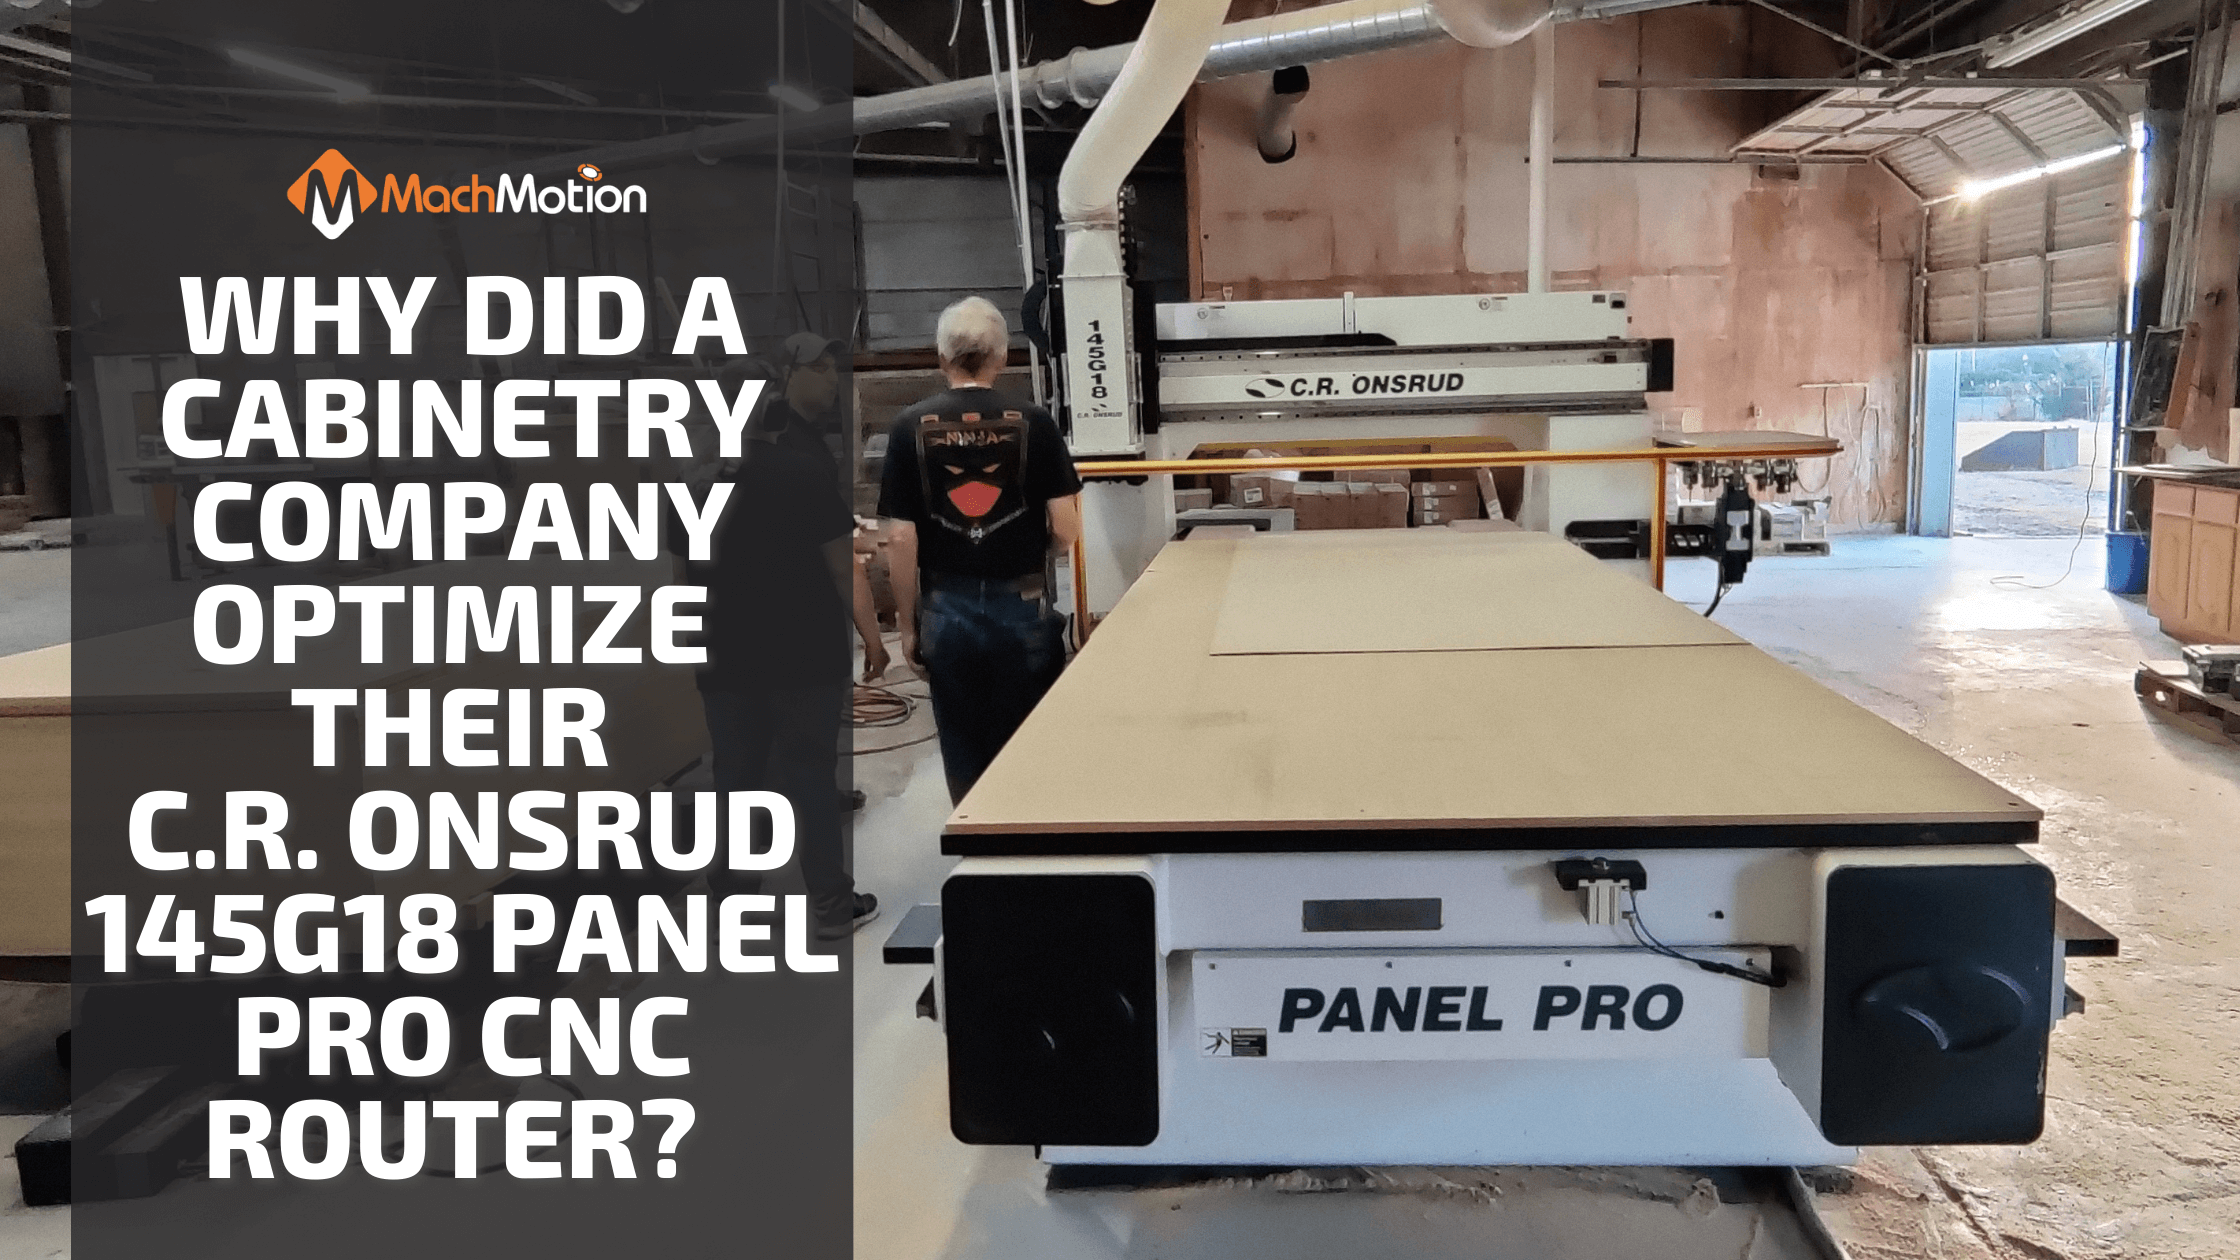 Smith Cabinetry Upgrades Their C.R. Onsrud Panel Pro Router With MachMotion